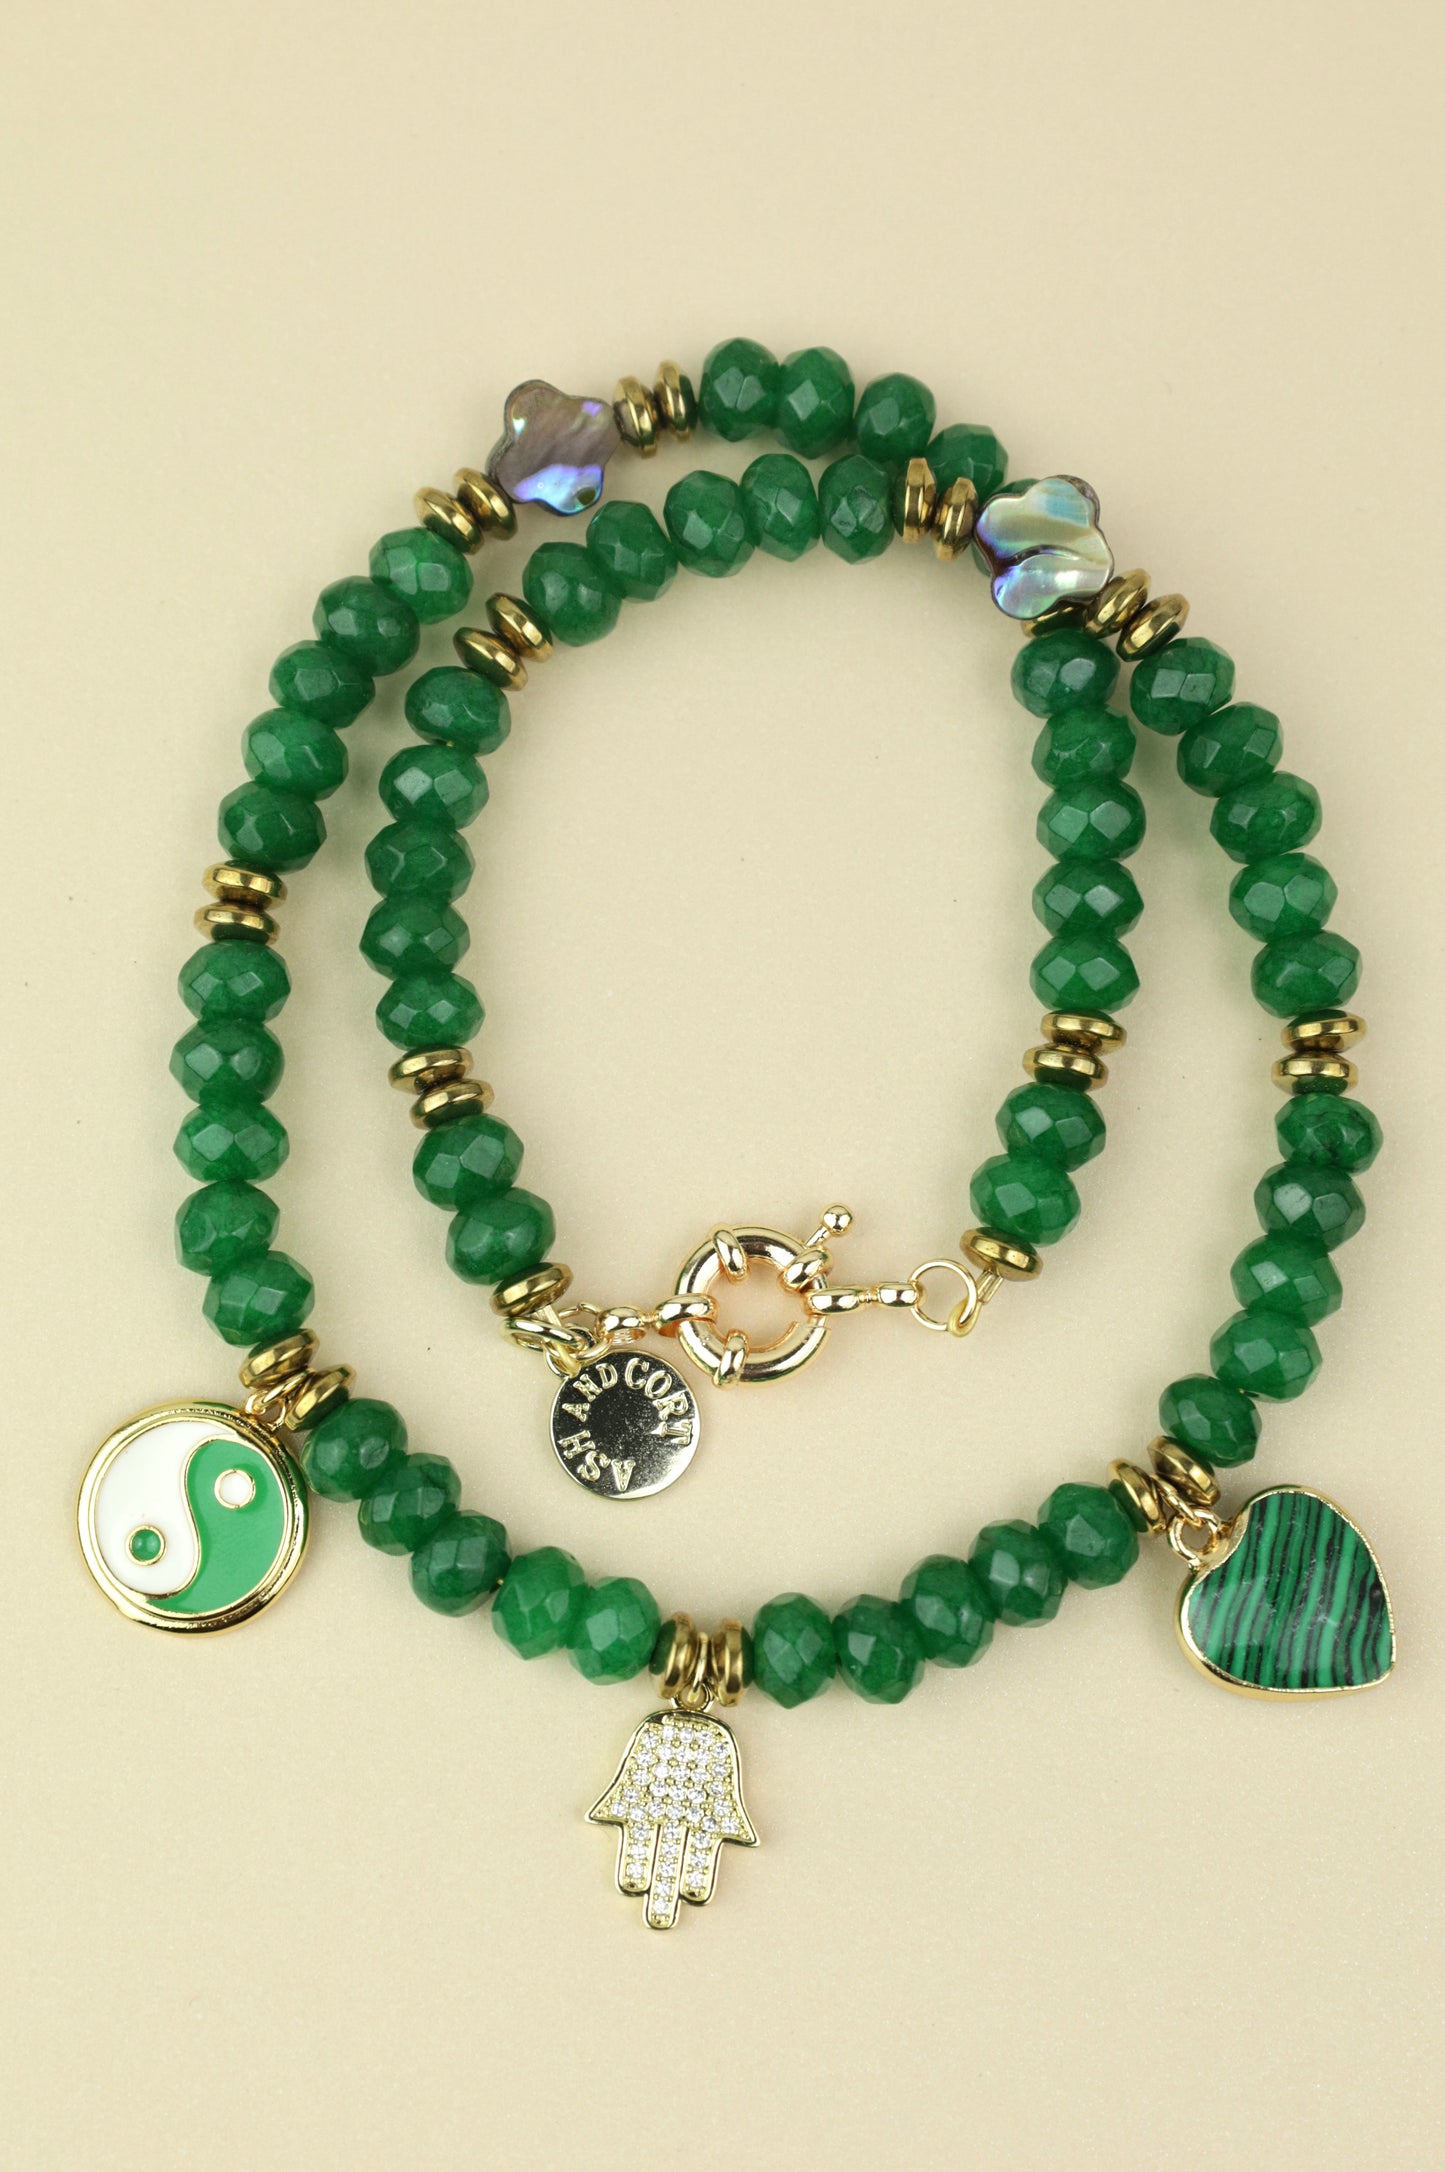 Green Agate and Abalone beaded necklace